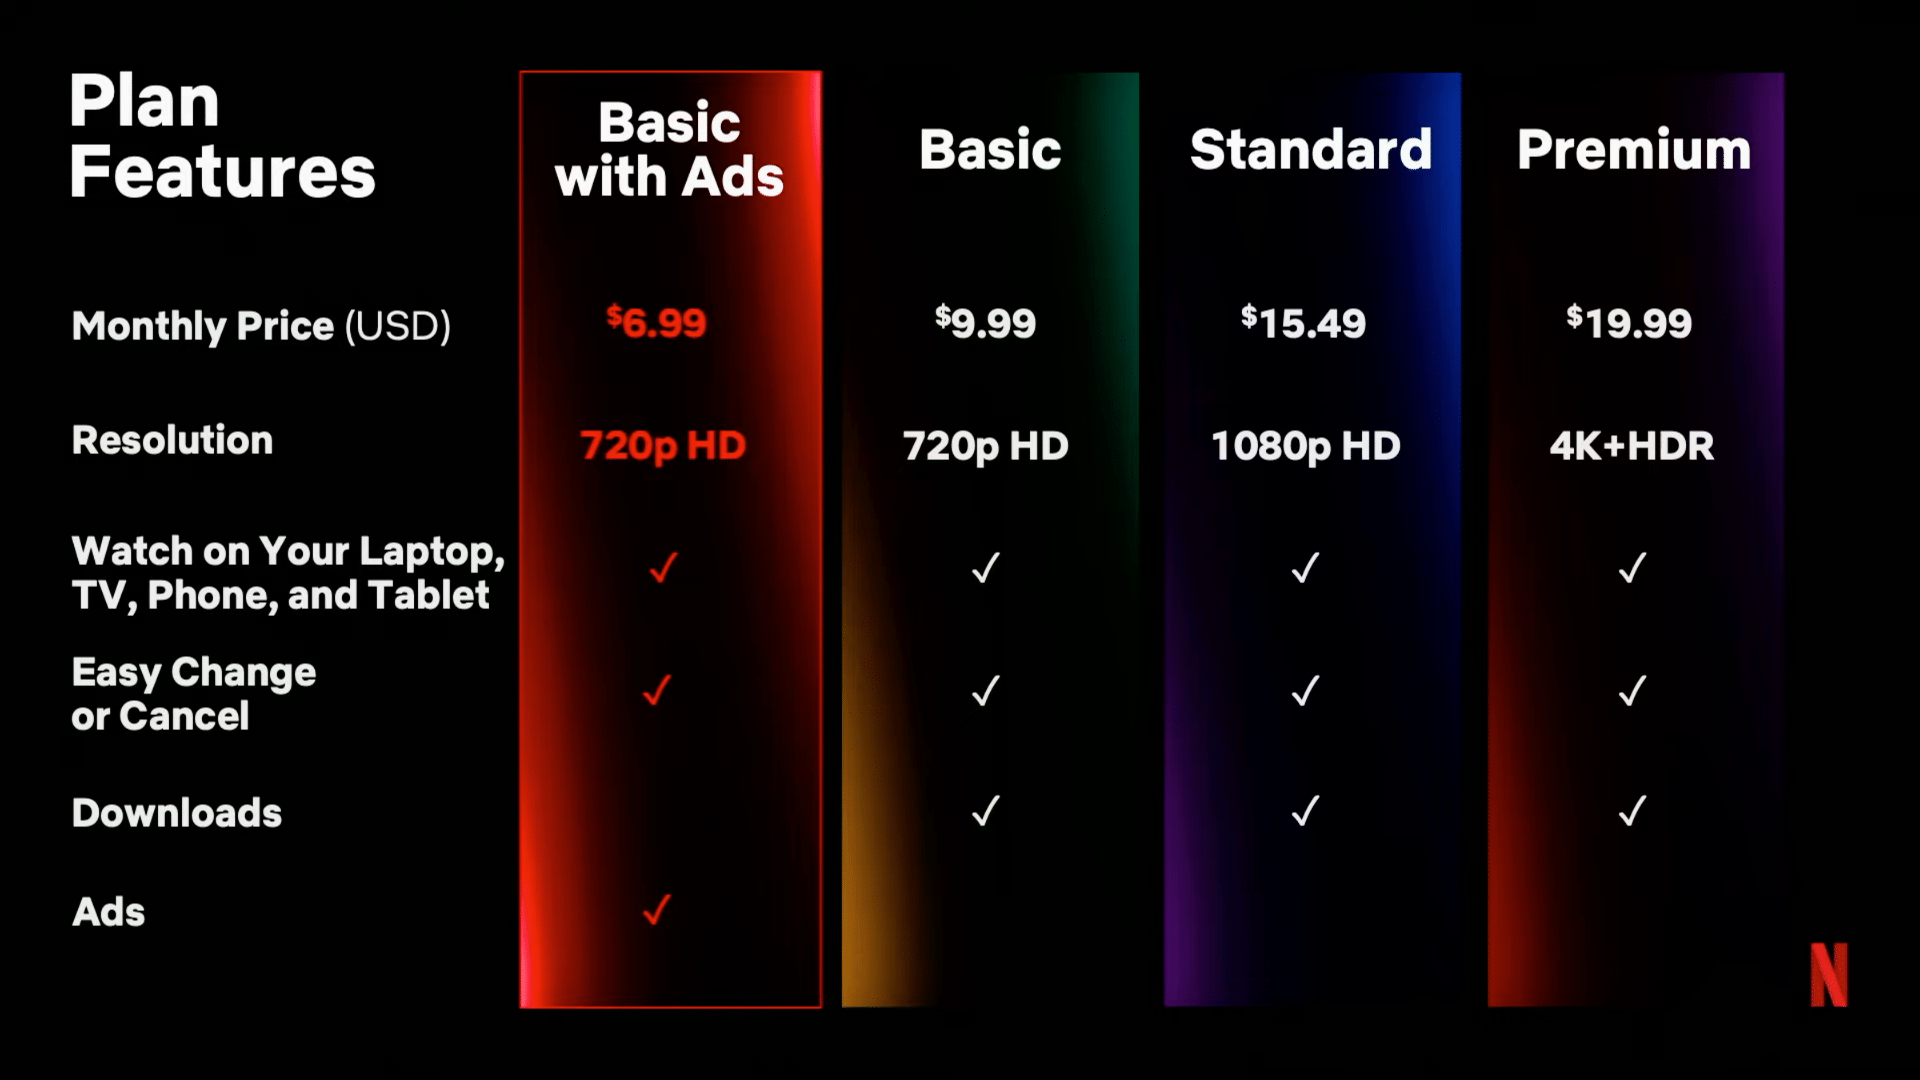 A table comparing the features and pricing of Netflix's plans: Basic with Ads, Basic, Standard and Premium